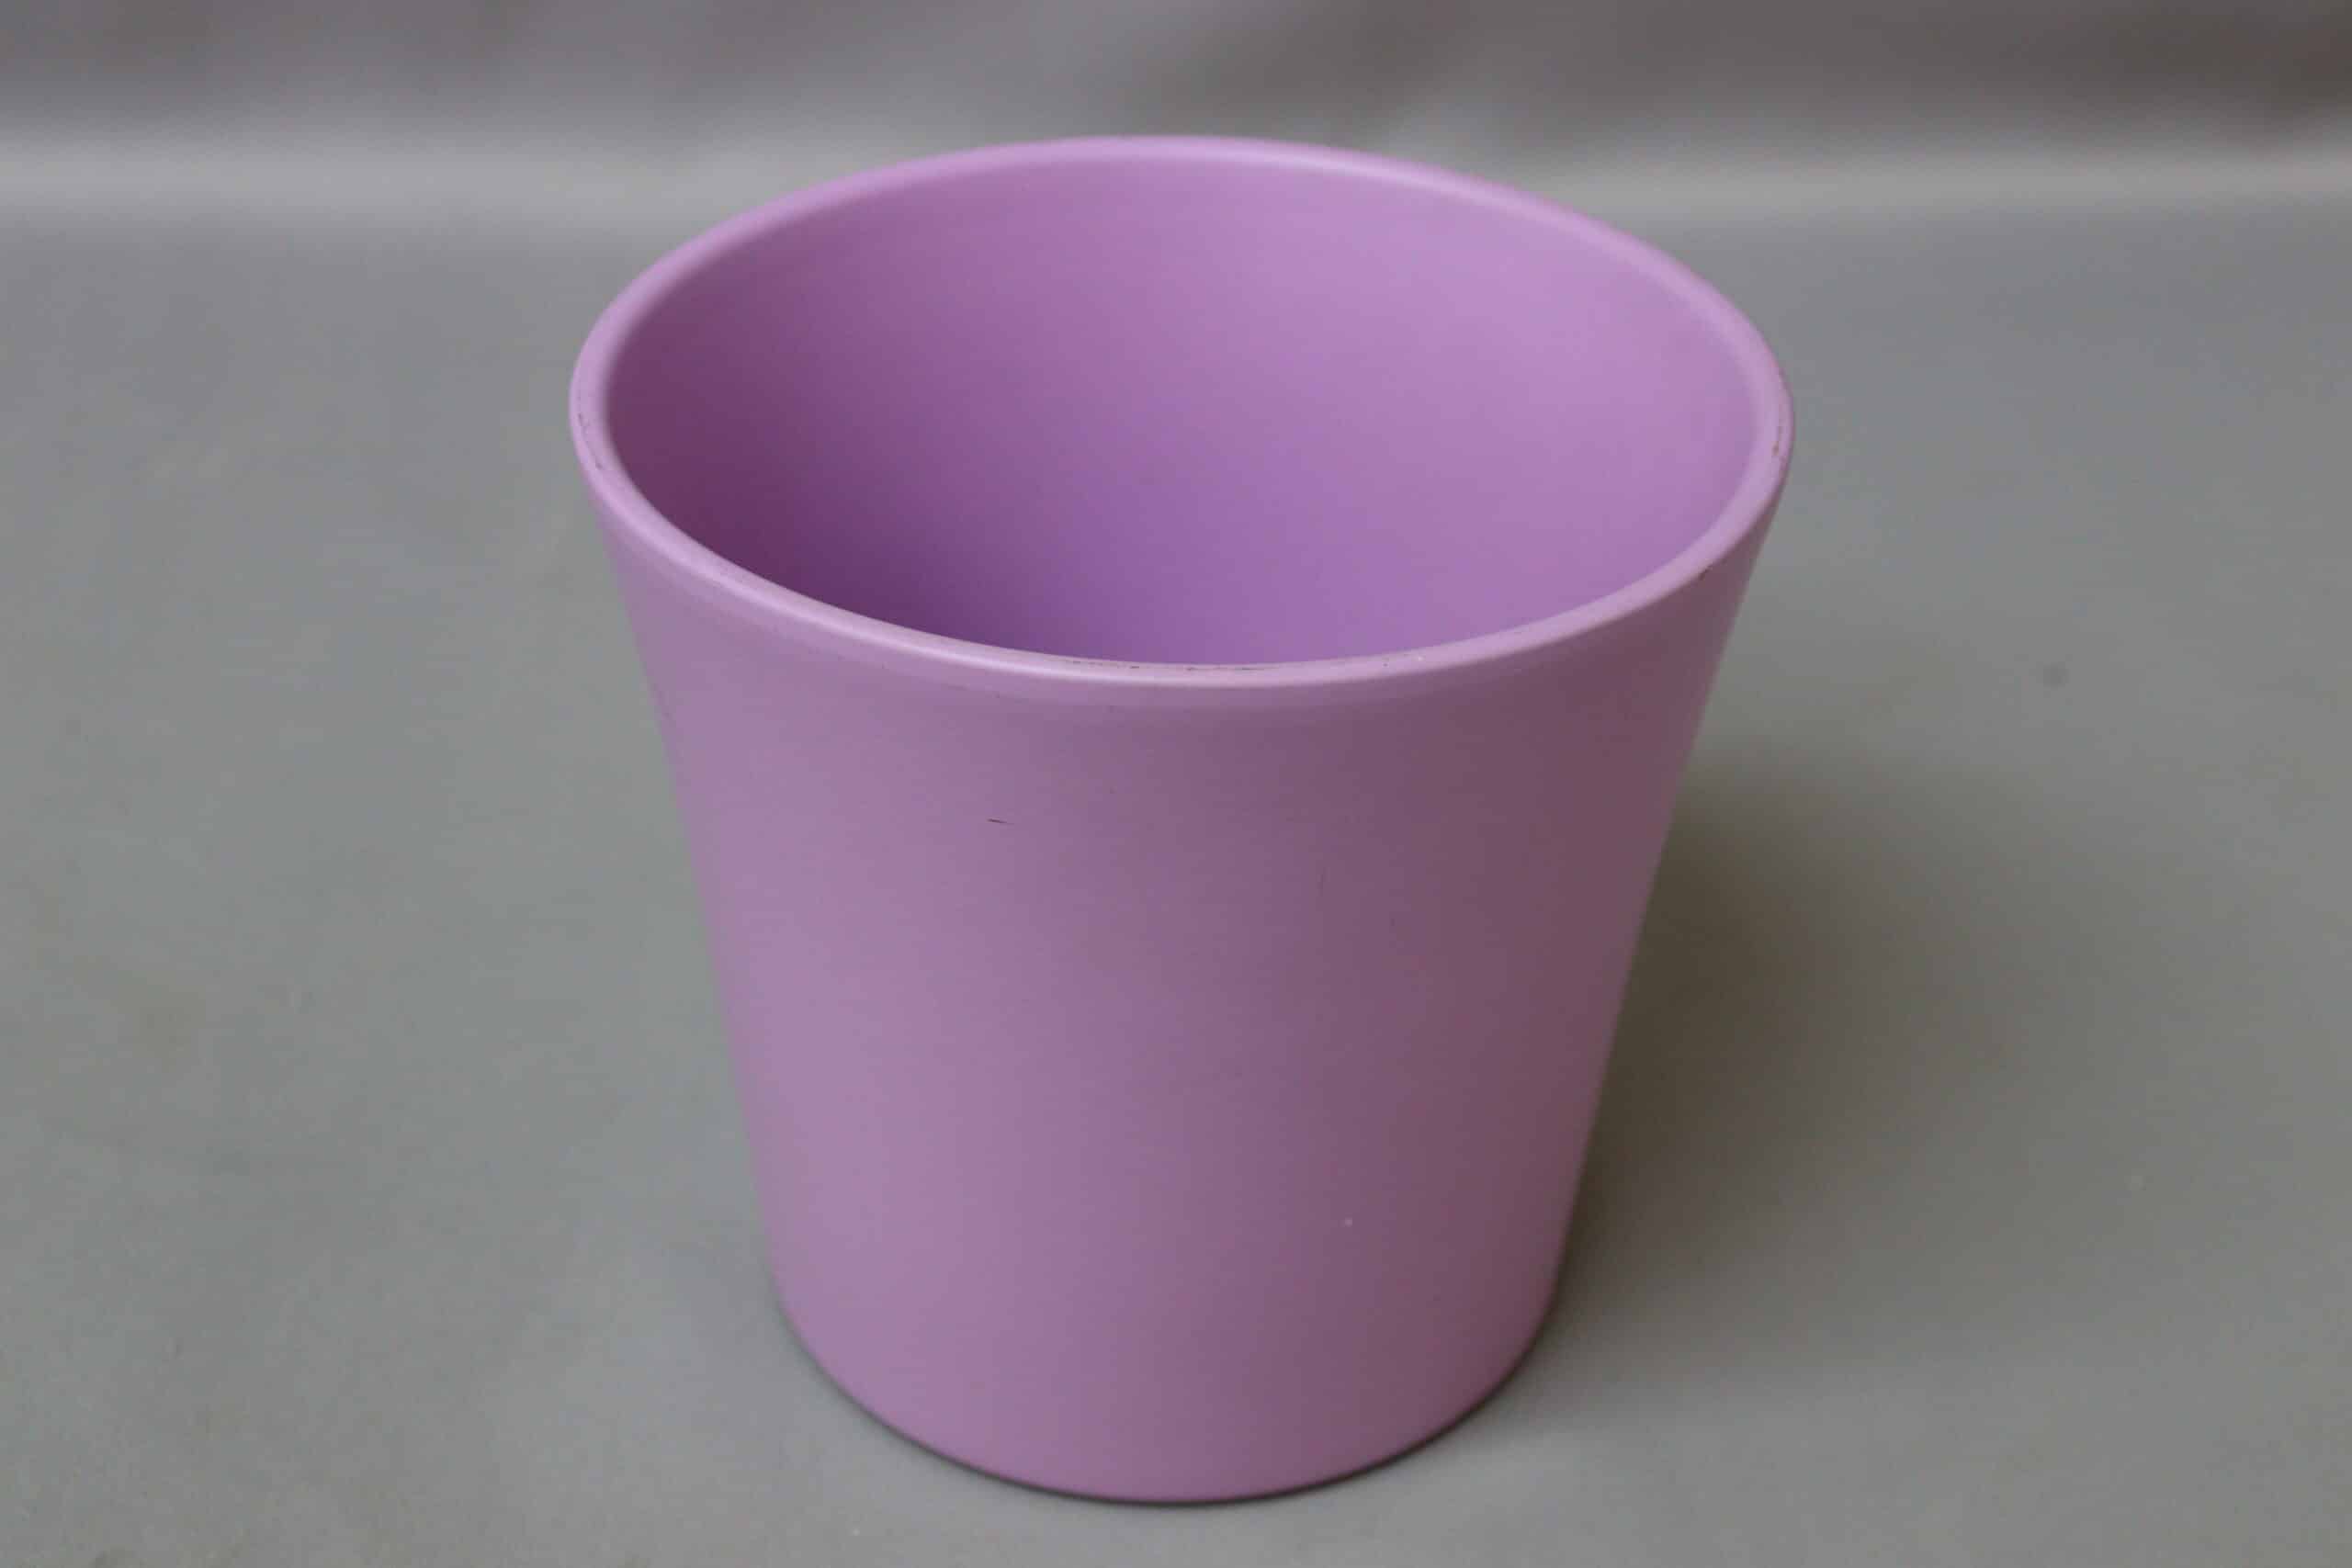 Smooth, matte, lavender-coloured pot cover for potted plants.